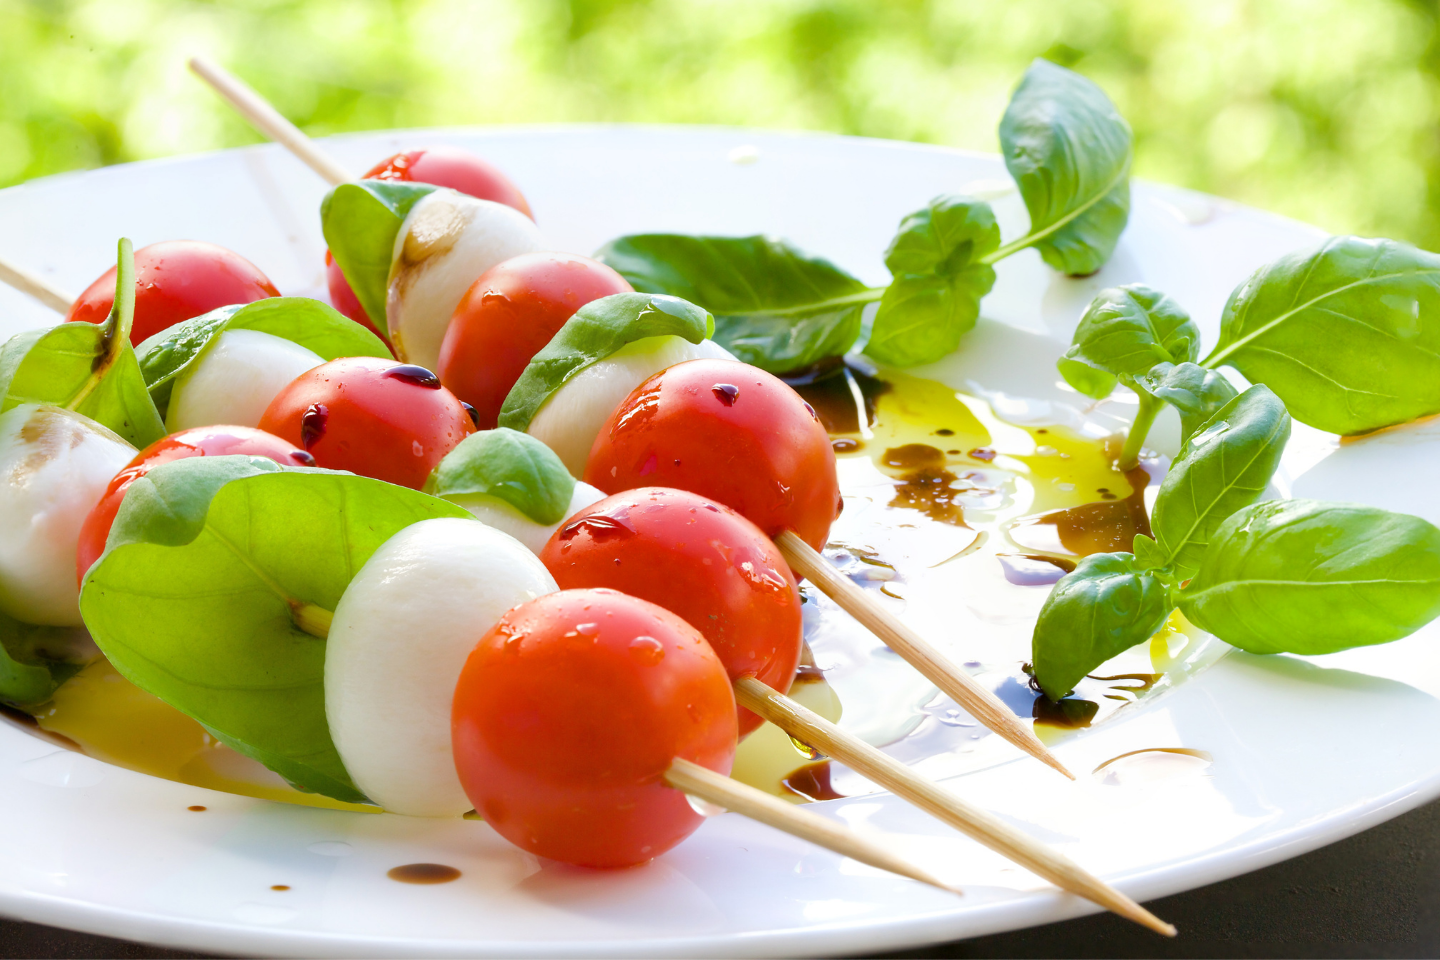 Plate of tomatoes, mozzarella balls, and basil on skewers in outdoor setting